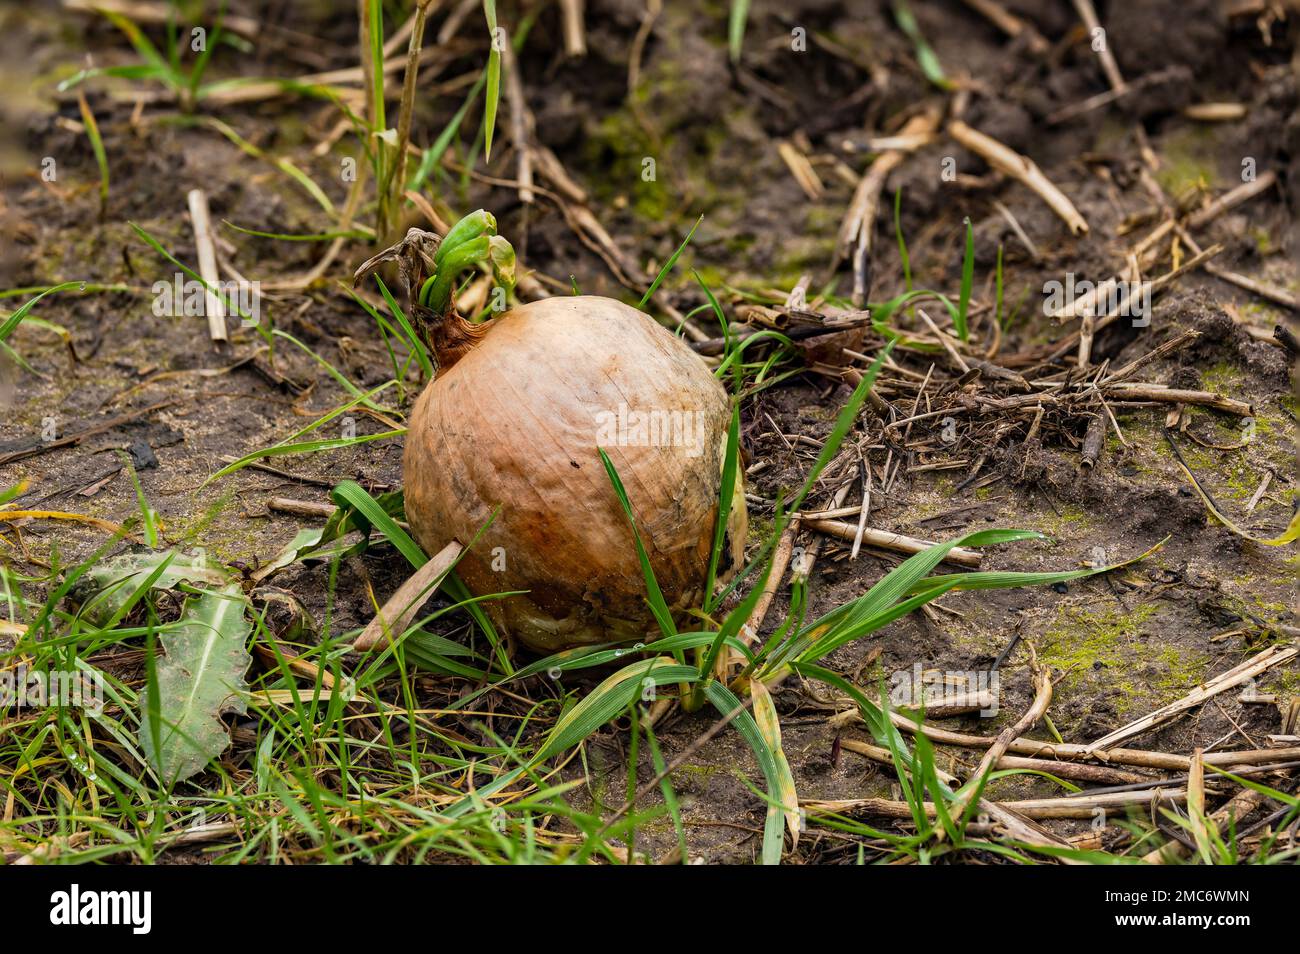 Focus stacking shot of a germinating onion with green shoot on a field after harvest in winter, Germany Stock Photo